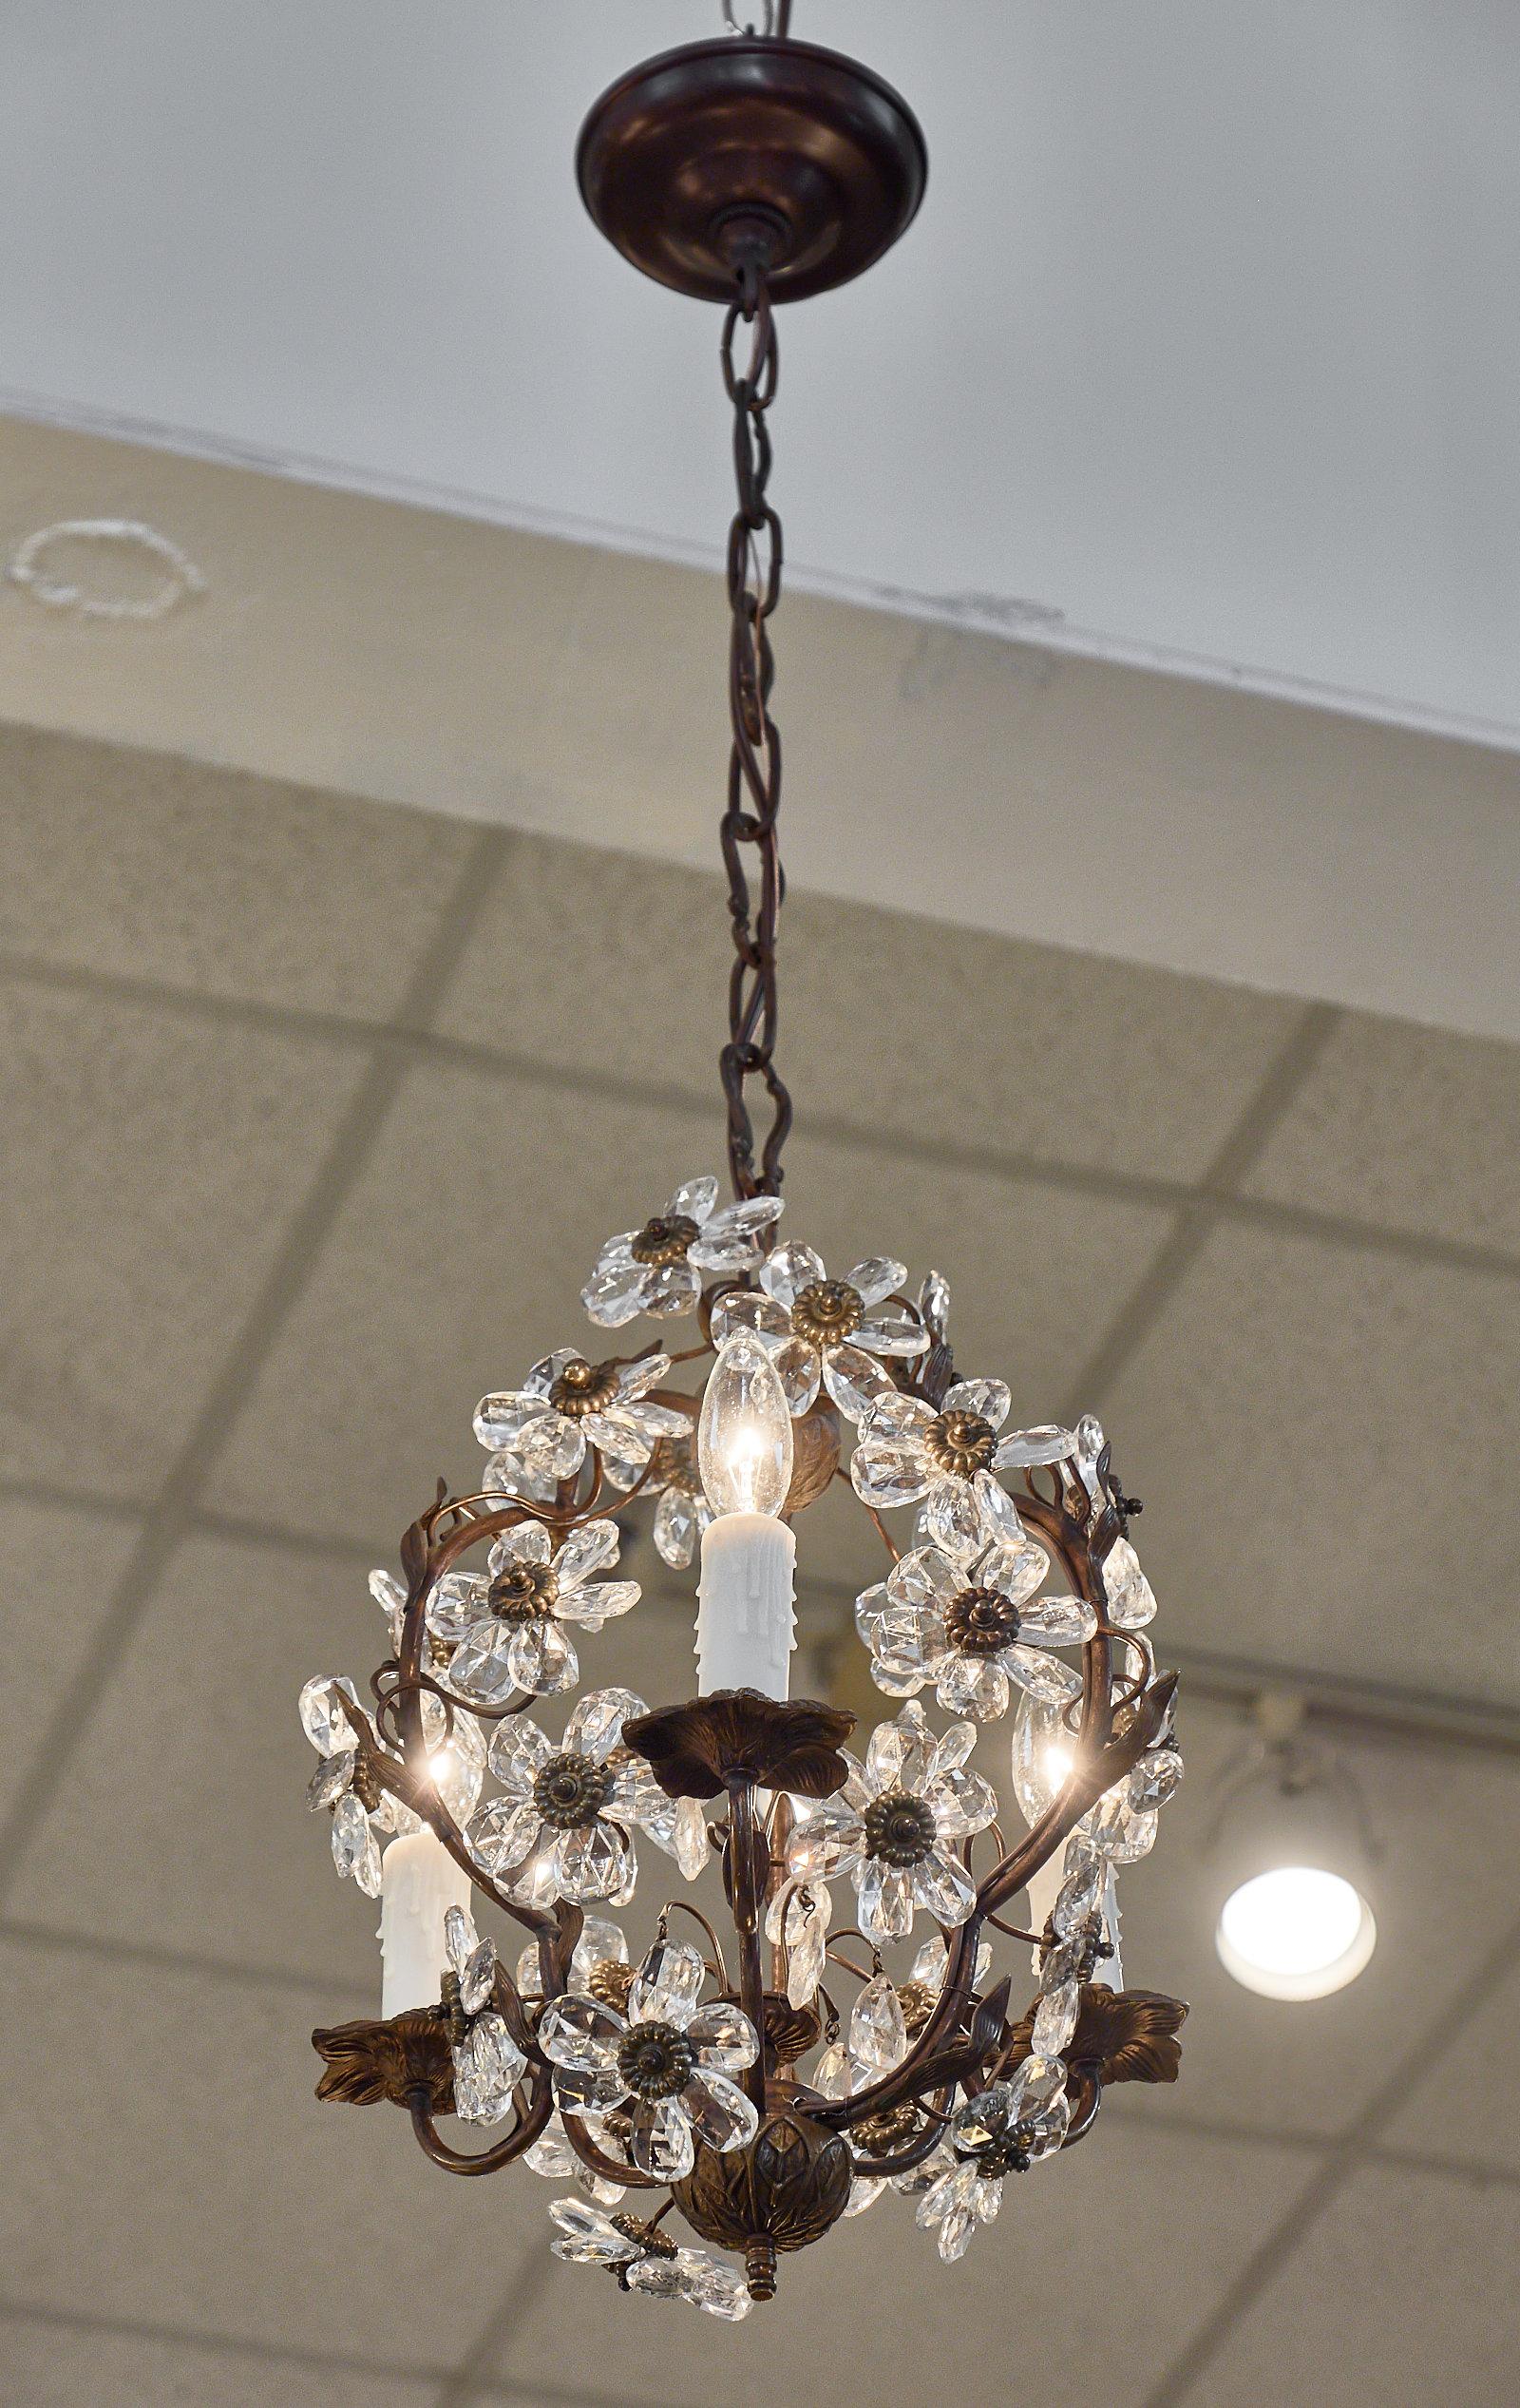 French Art Deco period chandelier with hand cut crystal flowers and gold leafed and hand-hammered structure by Maison Baguès.